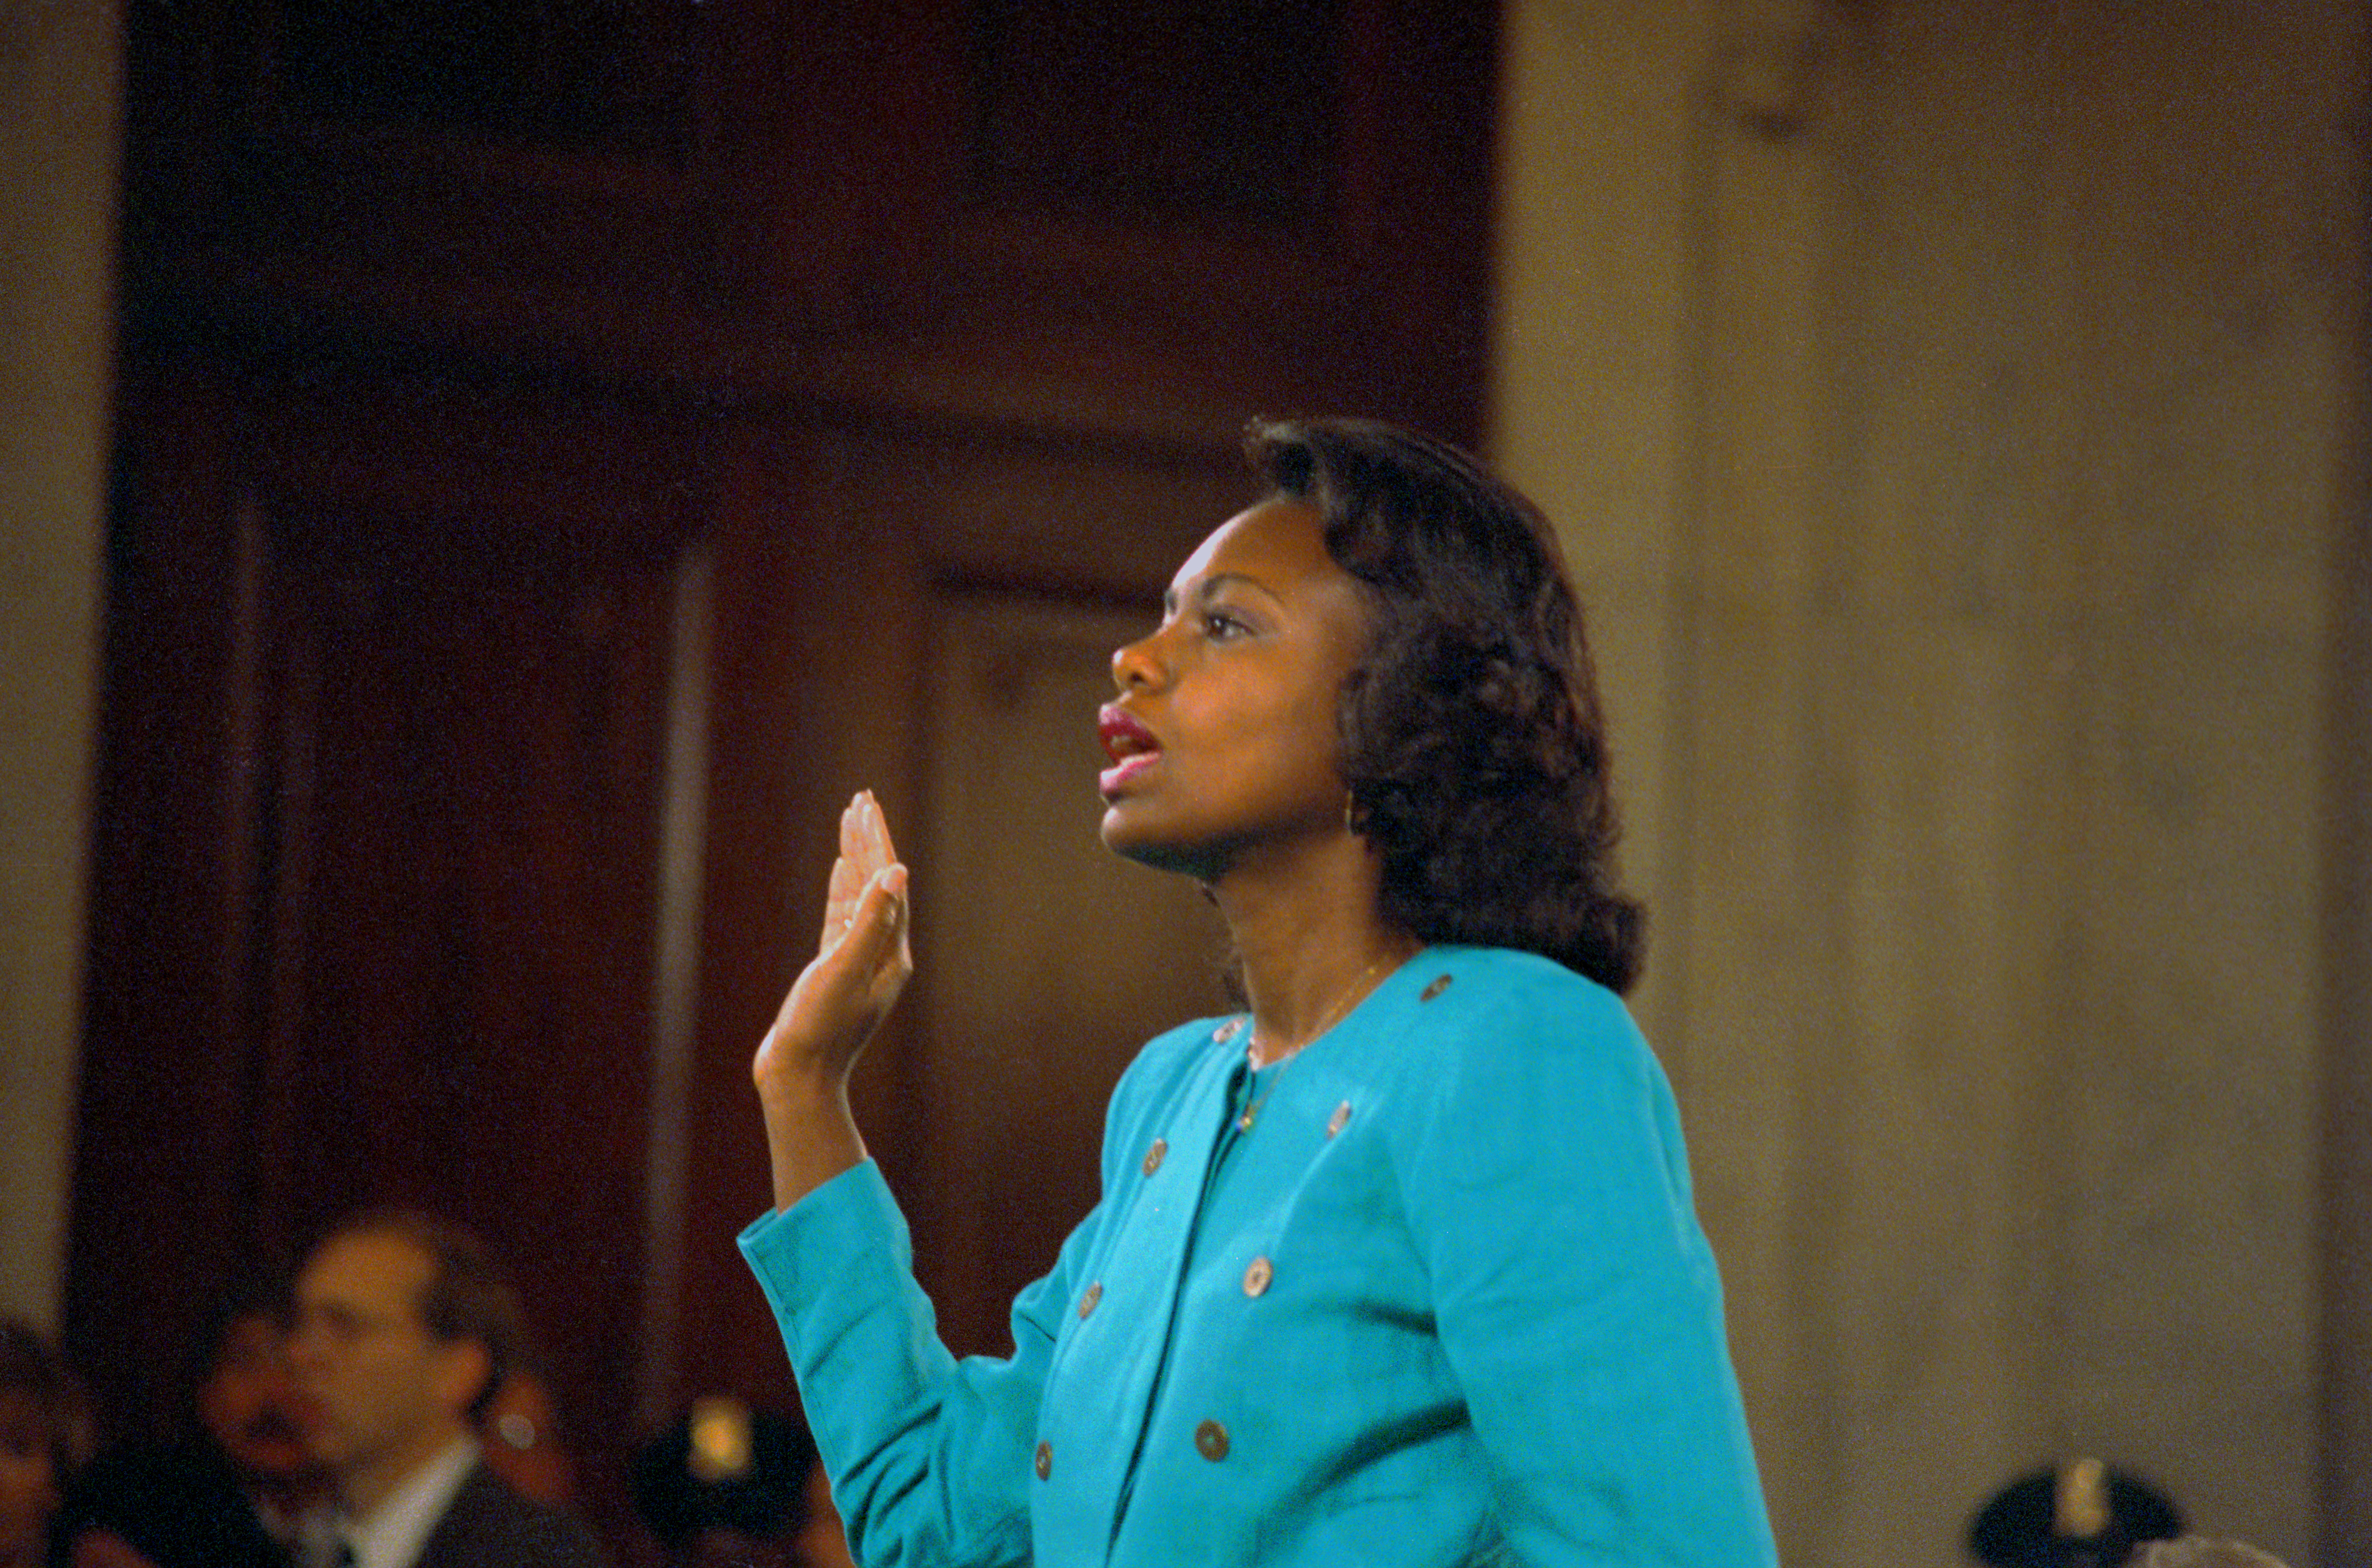 Professor Anita Hill is sworn-in before testifying at the Senate Judiciary hearing on the Clarence Thomas Supreme Court nomination. (Bettmann&mdash;Getty Images)